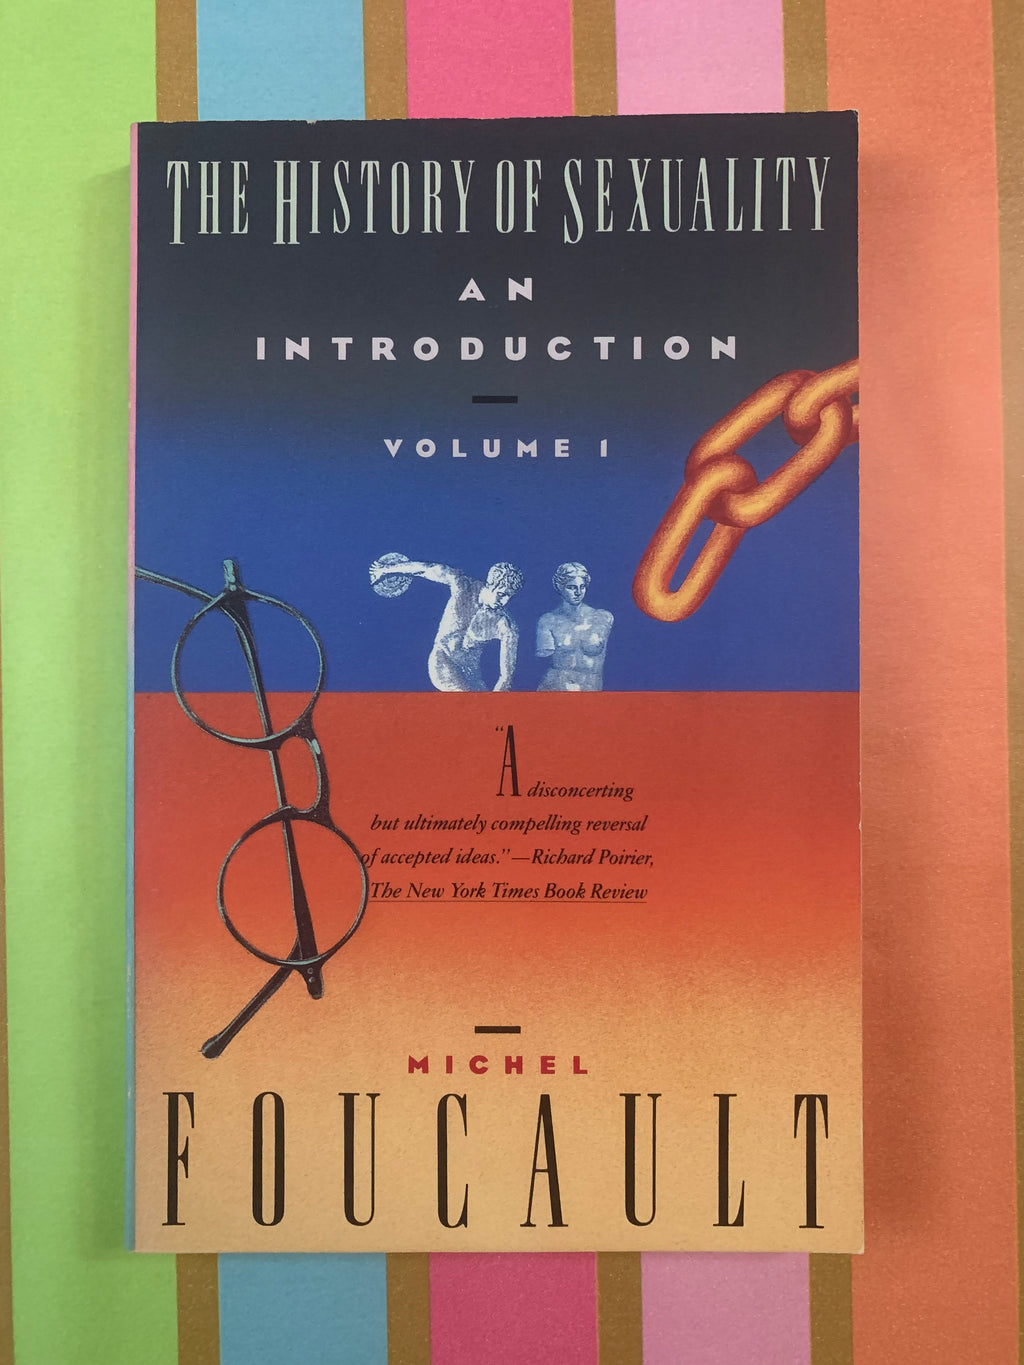 The History of Sexuality: An Introduction Volume 1- By Michel Foucault